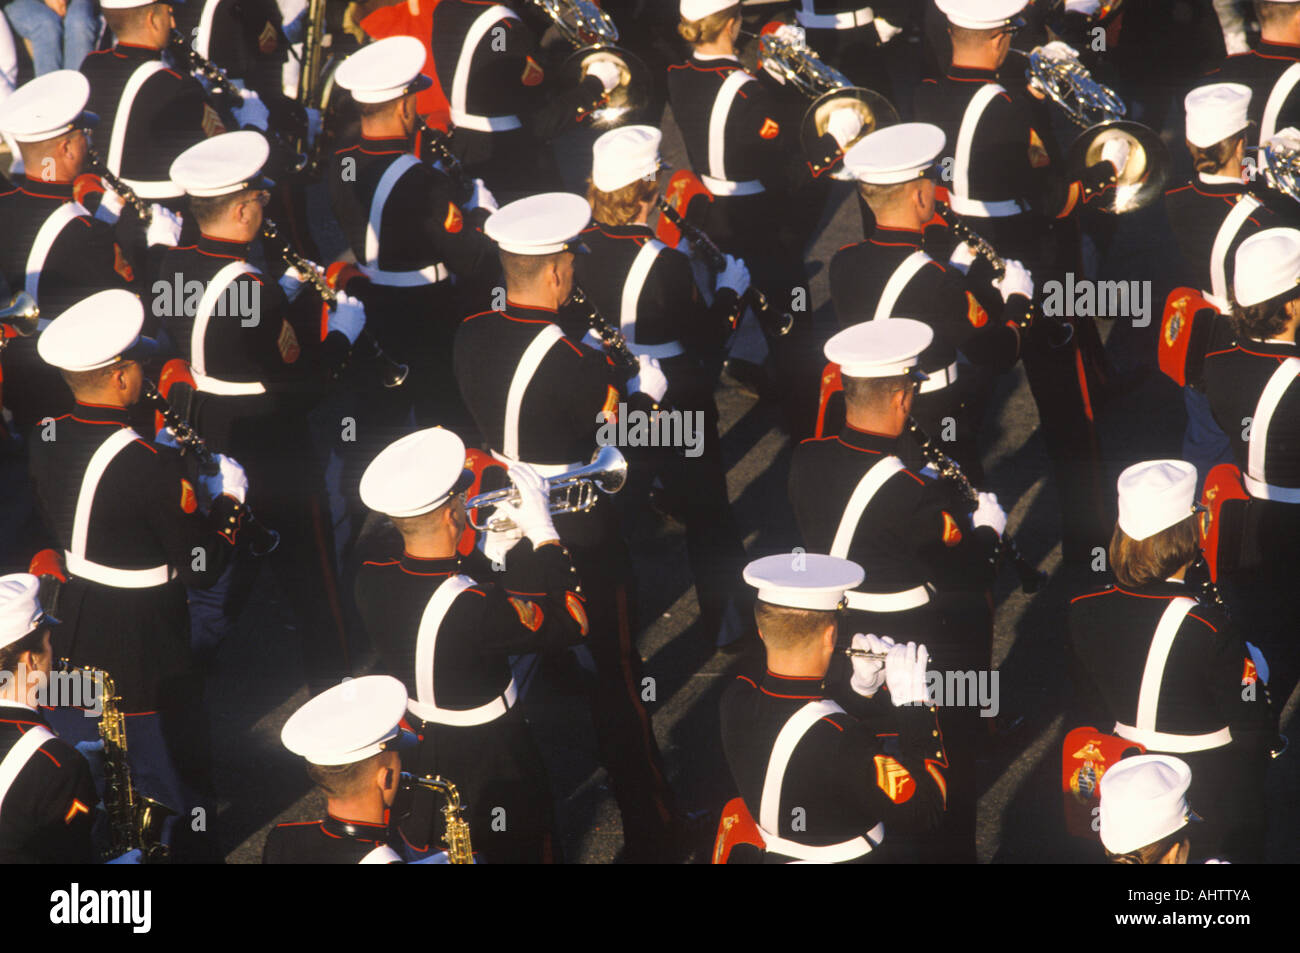 United States Marine Band Parade Marching in Pasadena en Californie Banque D'Images